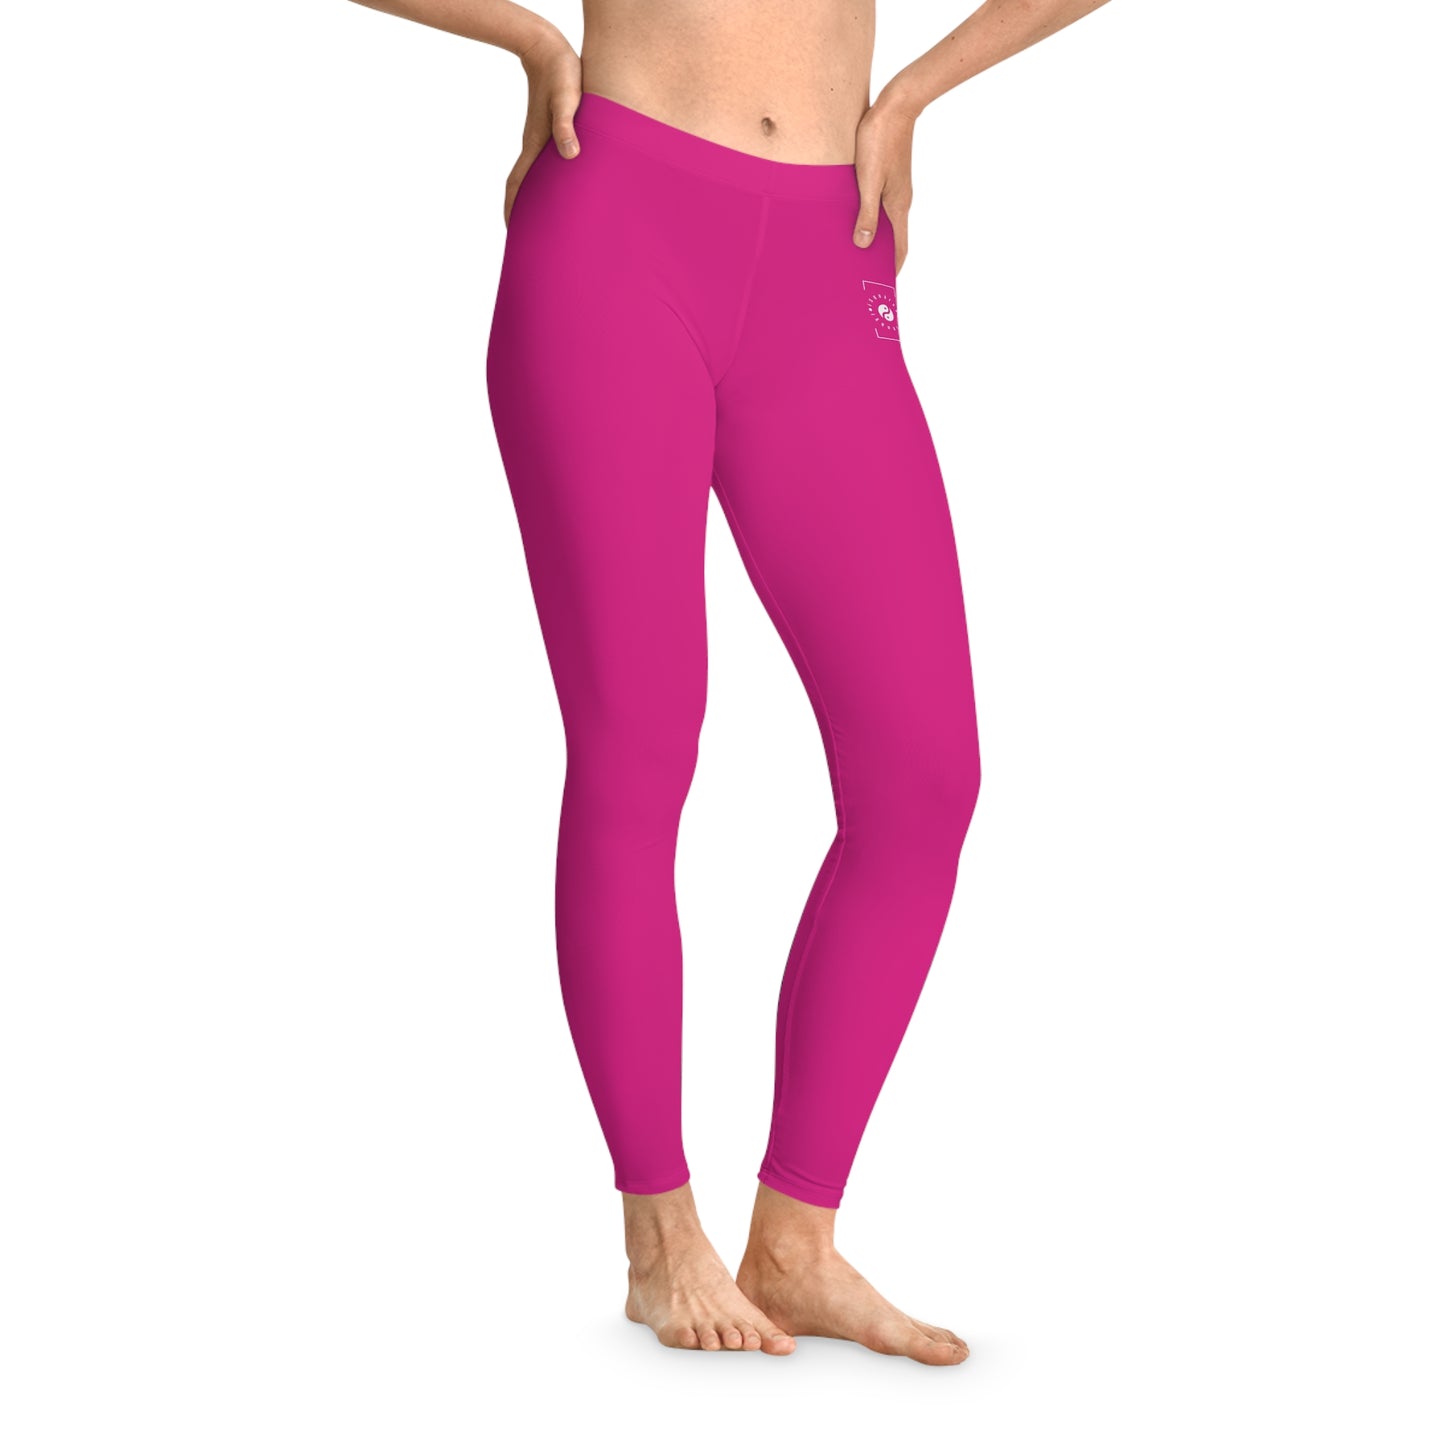 E0218A Pink - Unisex Tights